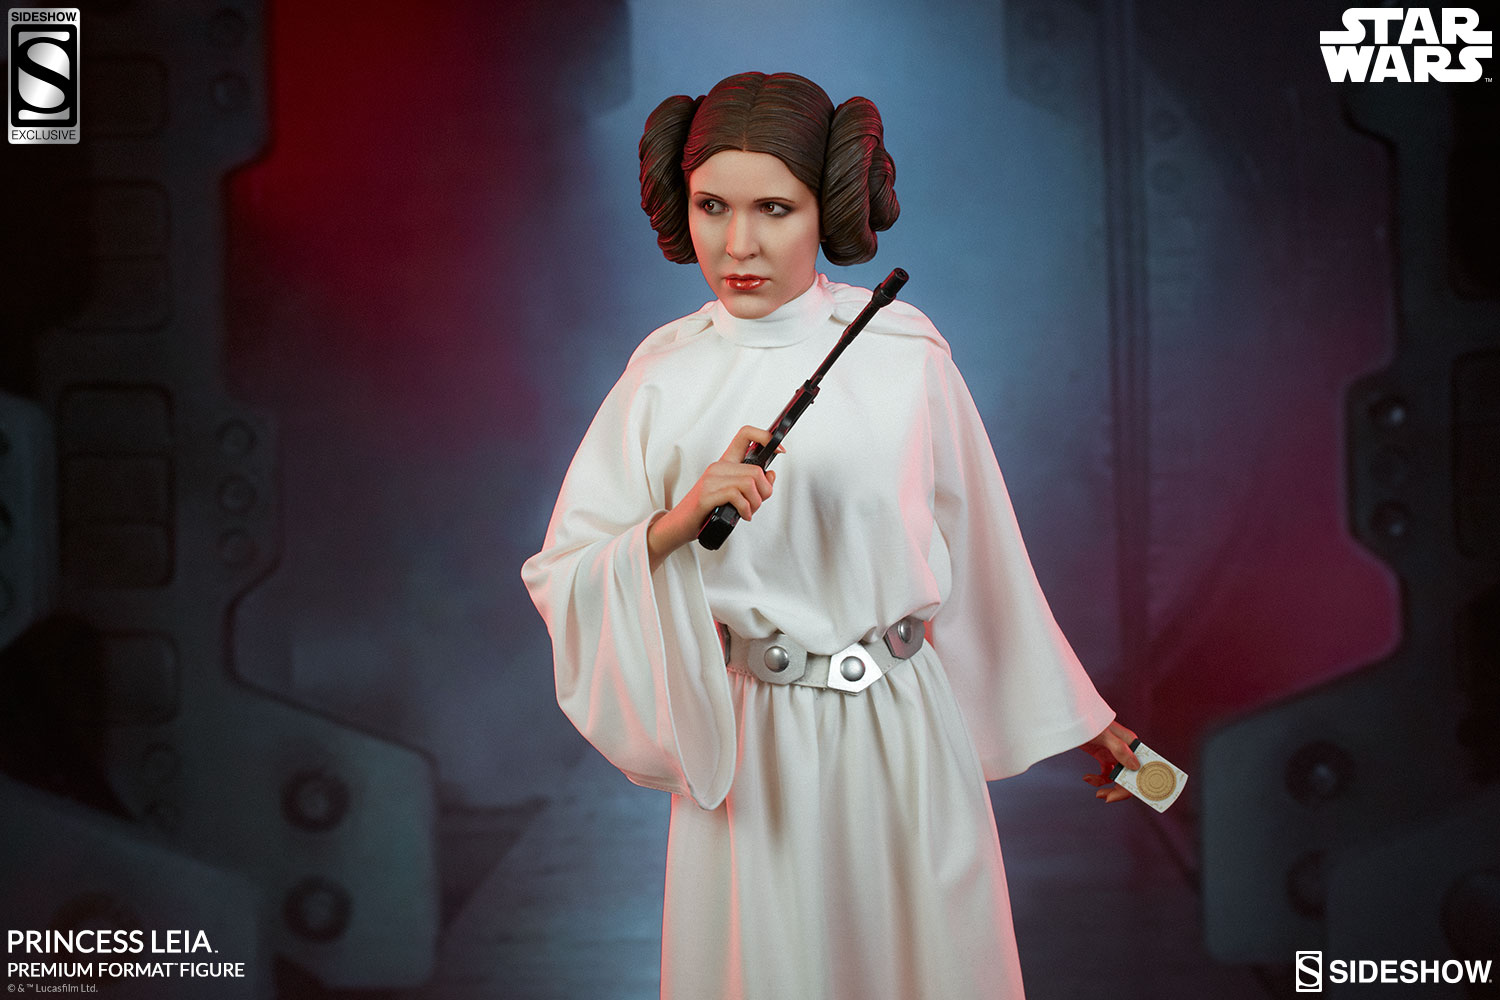 An Exclusive Look At Sideshow’s Stunning New Princess Leia Figure